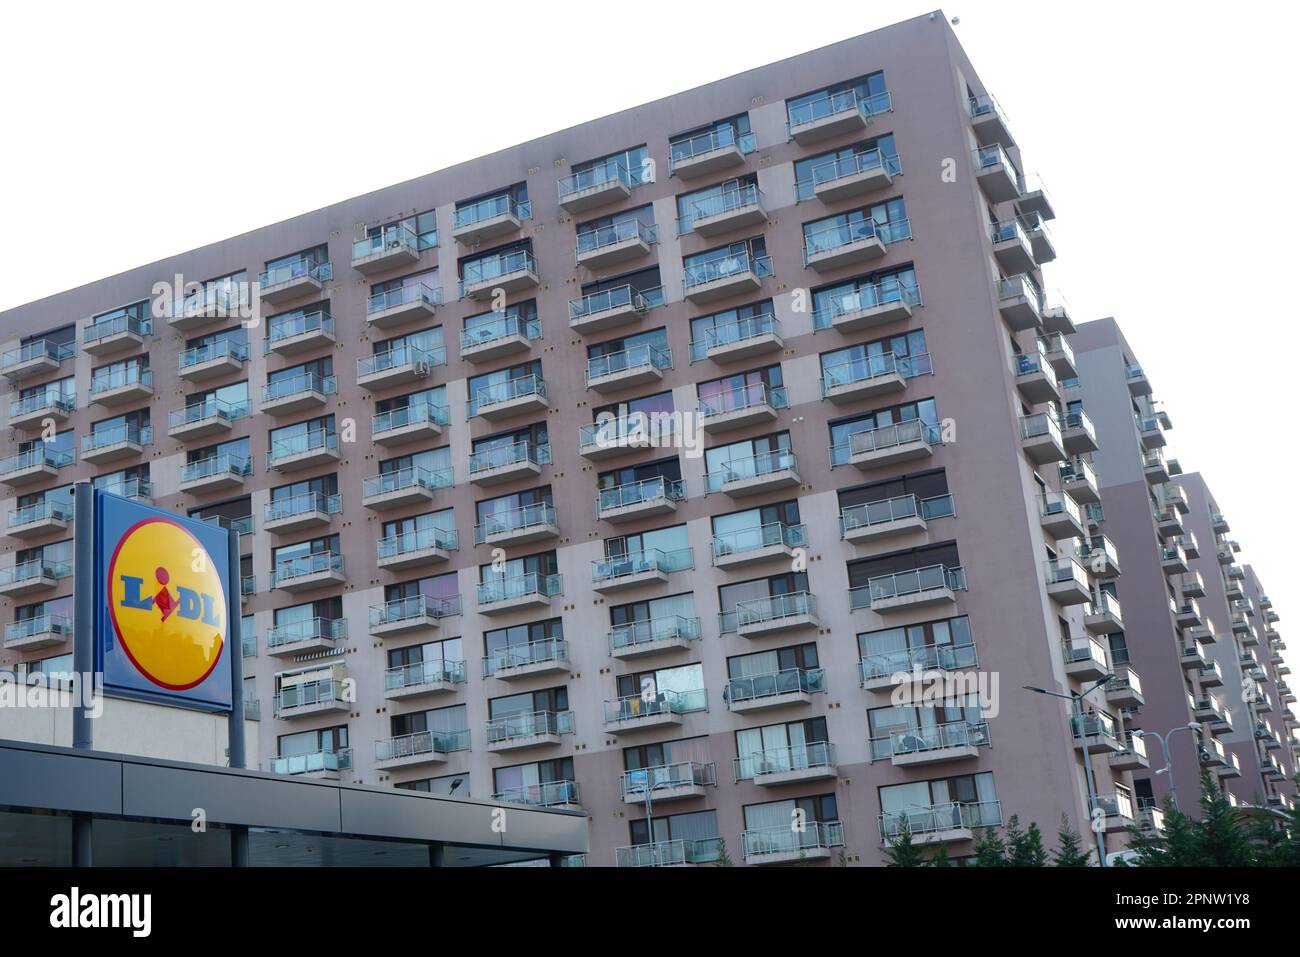 Group of large blocks of apartments in residential area and a Lidl logo above the entrance of a store in Bucharest, Romania on April 9, 2023 Stock Photo